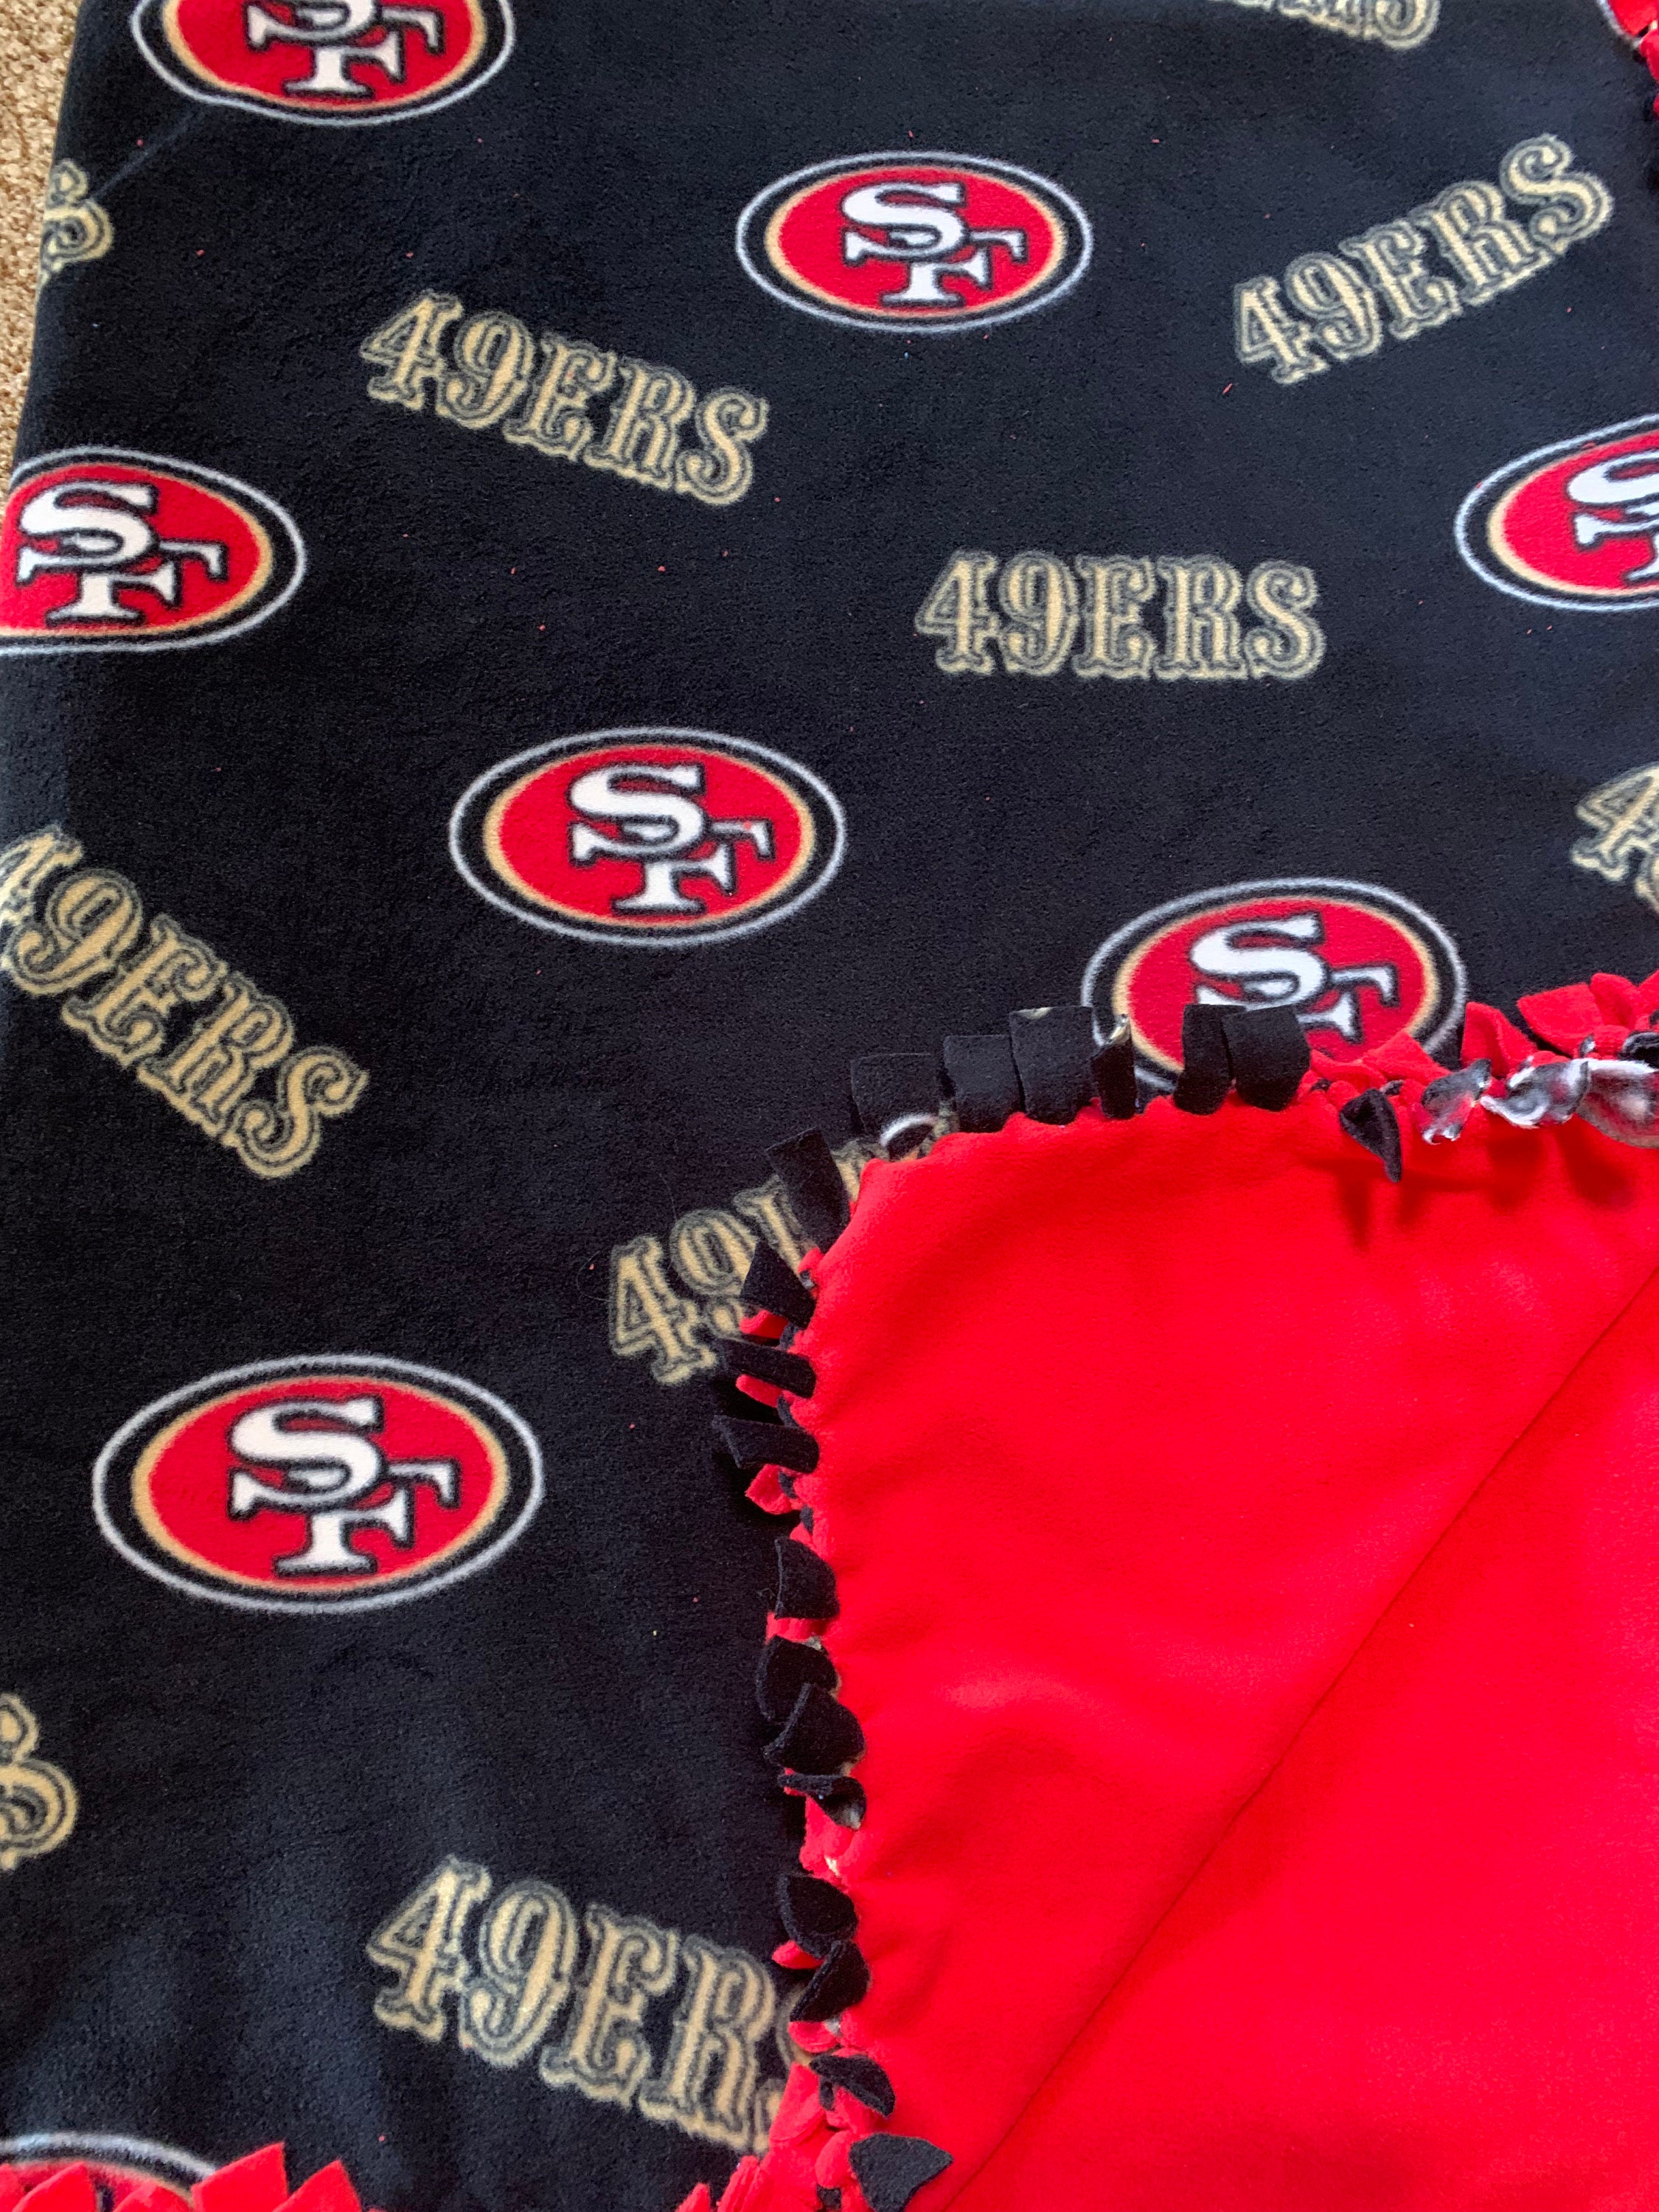 San Francisco 49ers Tumbler Wrap – Central State Printing